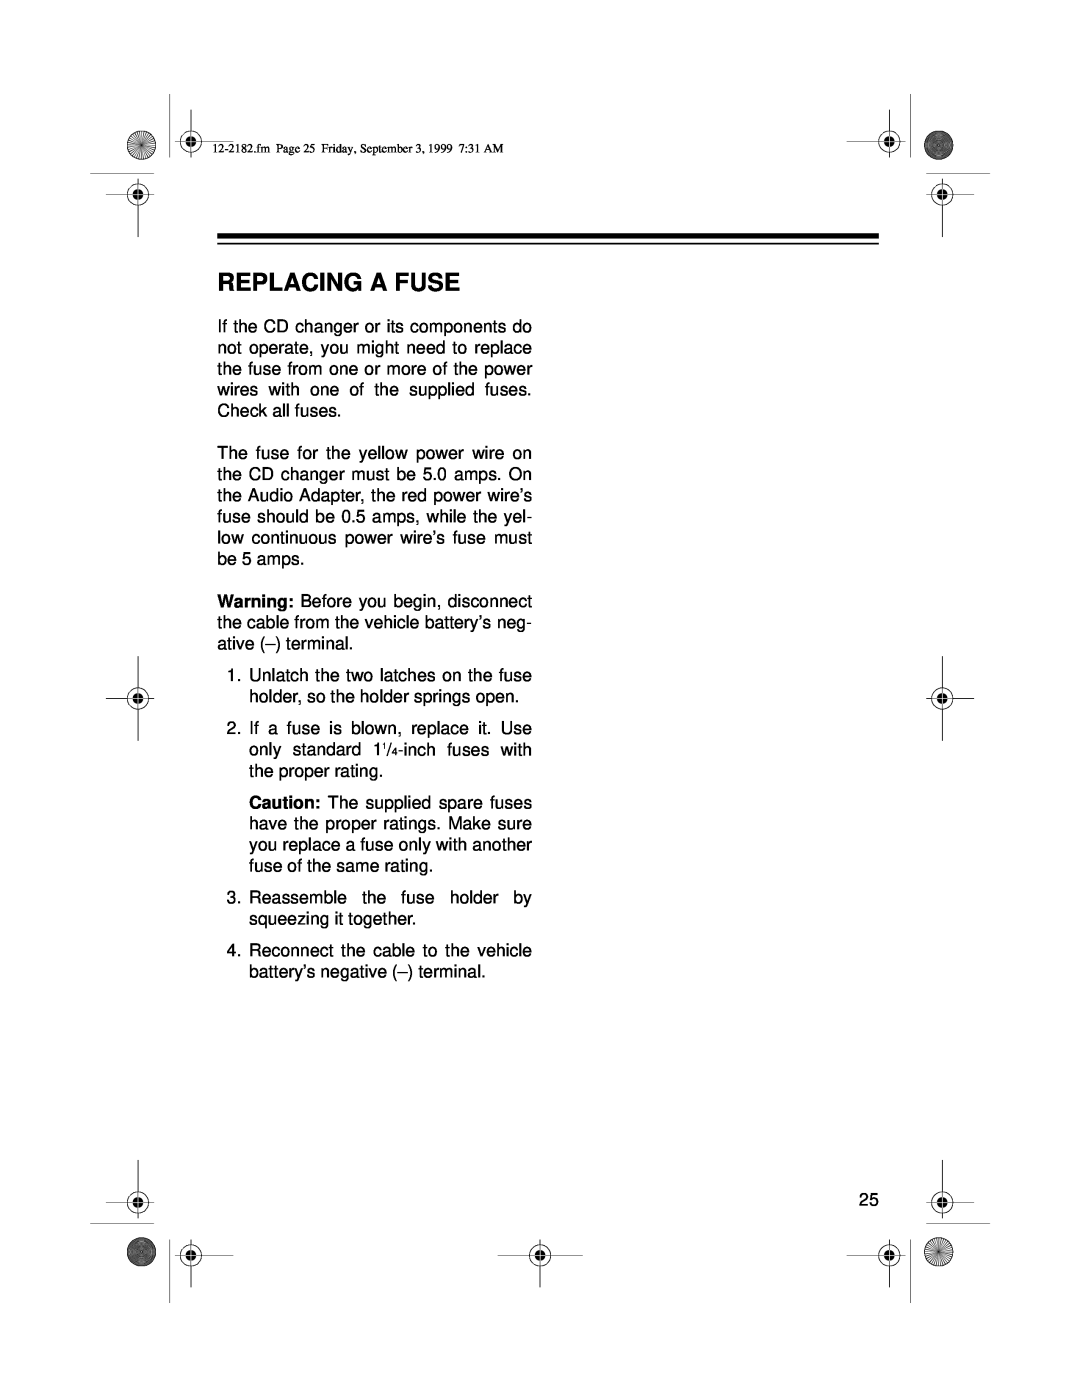 Radio Shack 10 Disc CD Changer owner manual Replacing A Fuse 